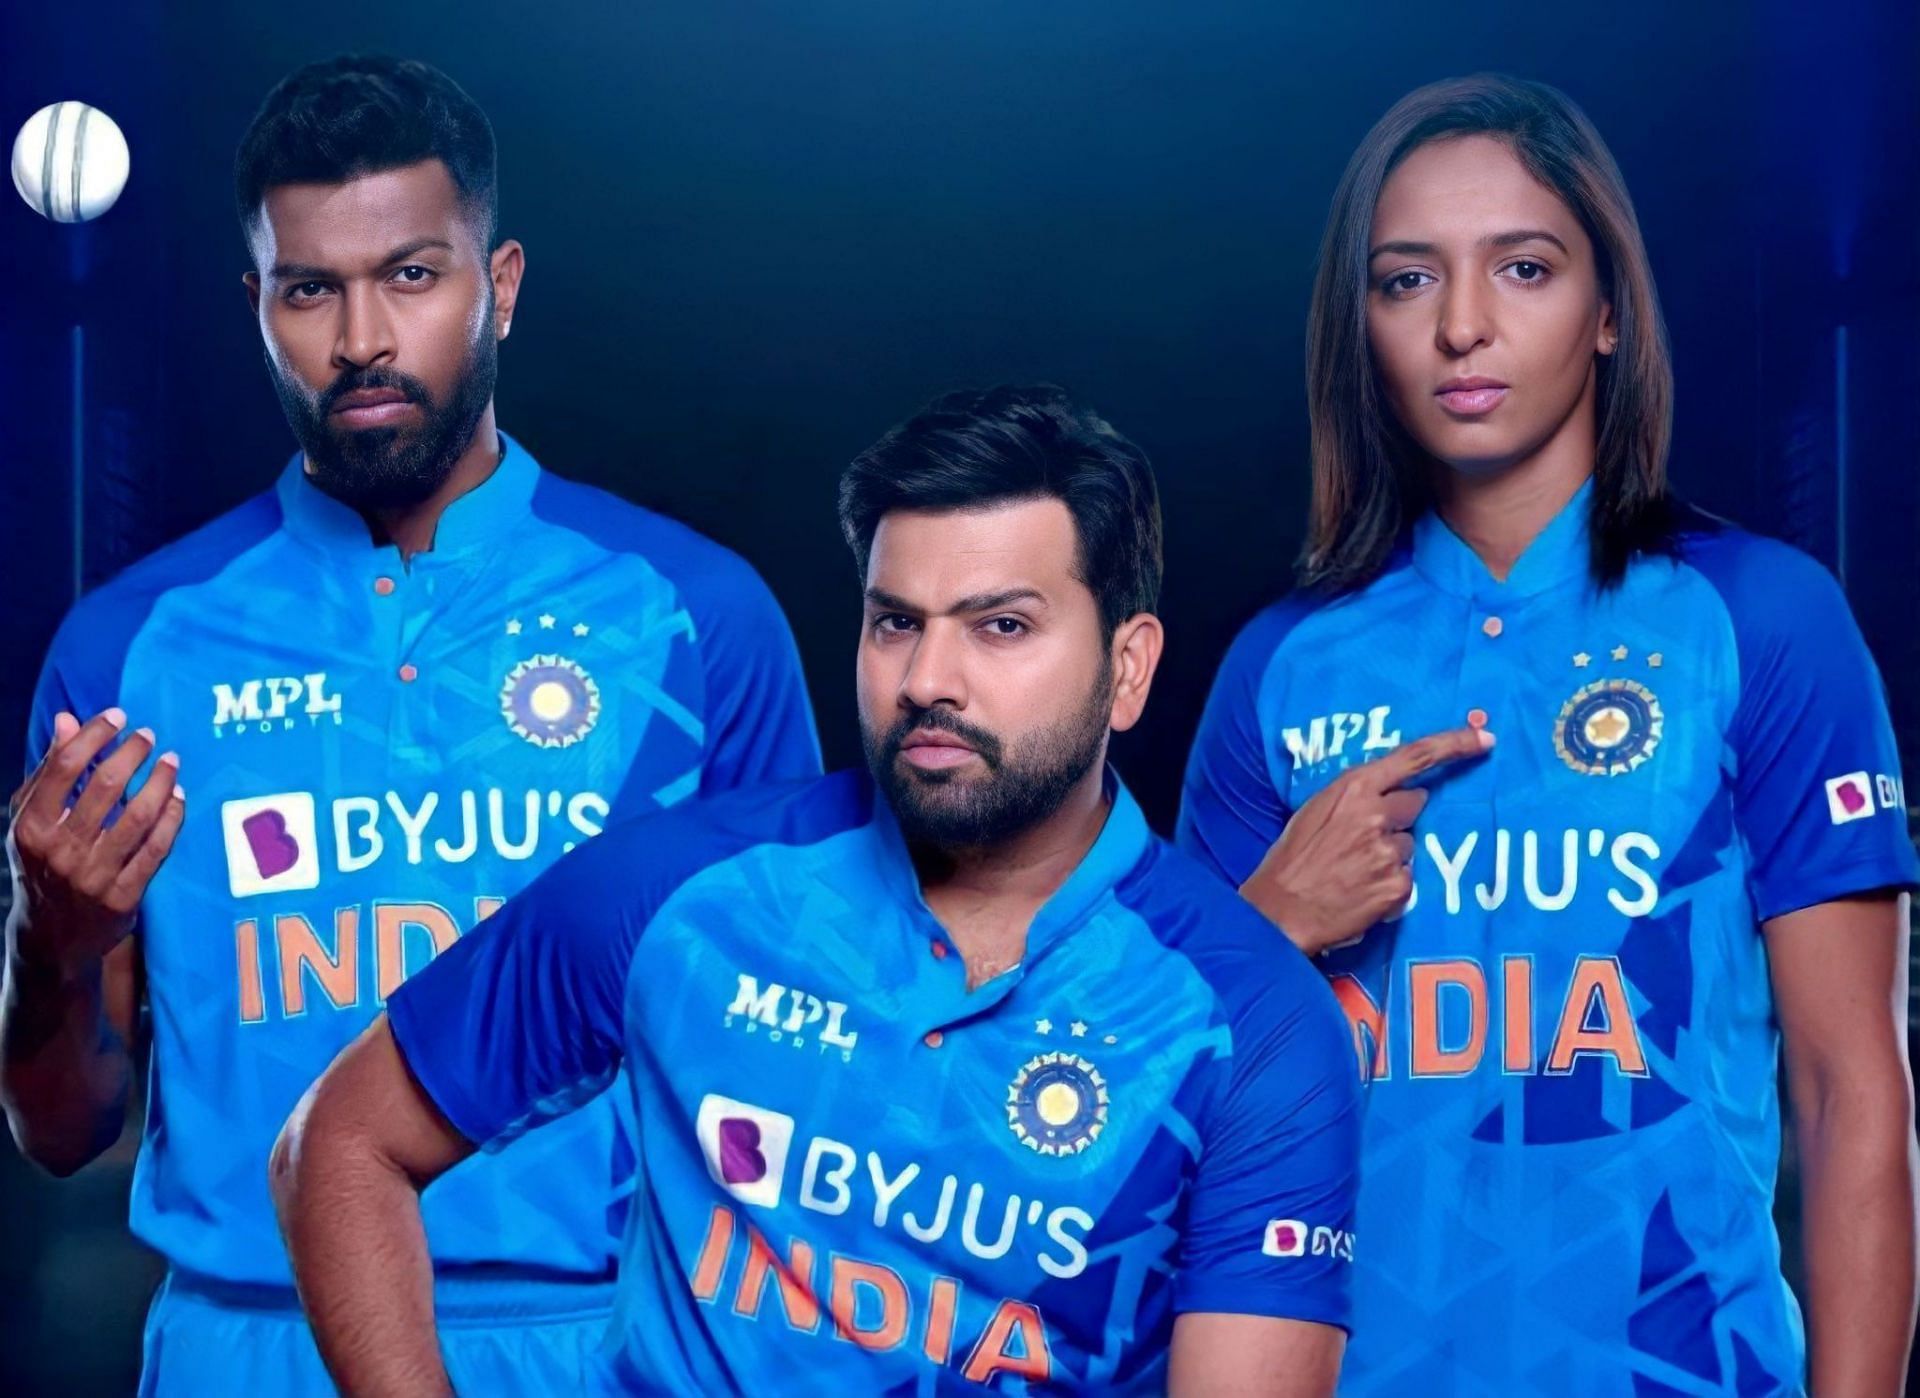 Team india unveiled their jersey in September [Pic Credit: BCCI]